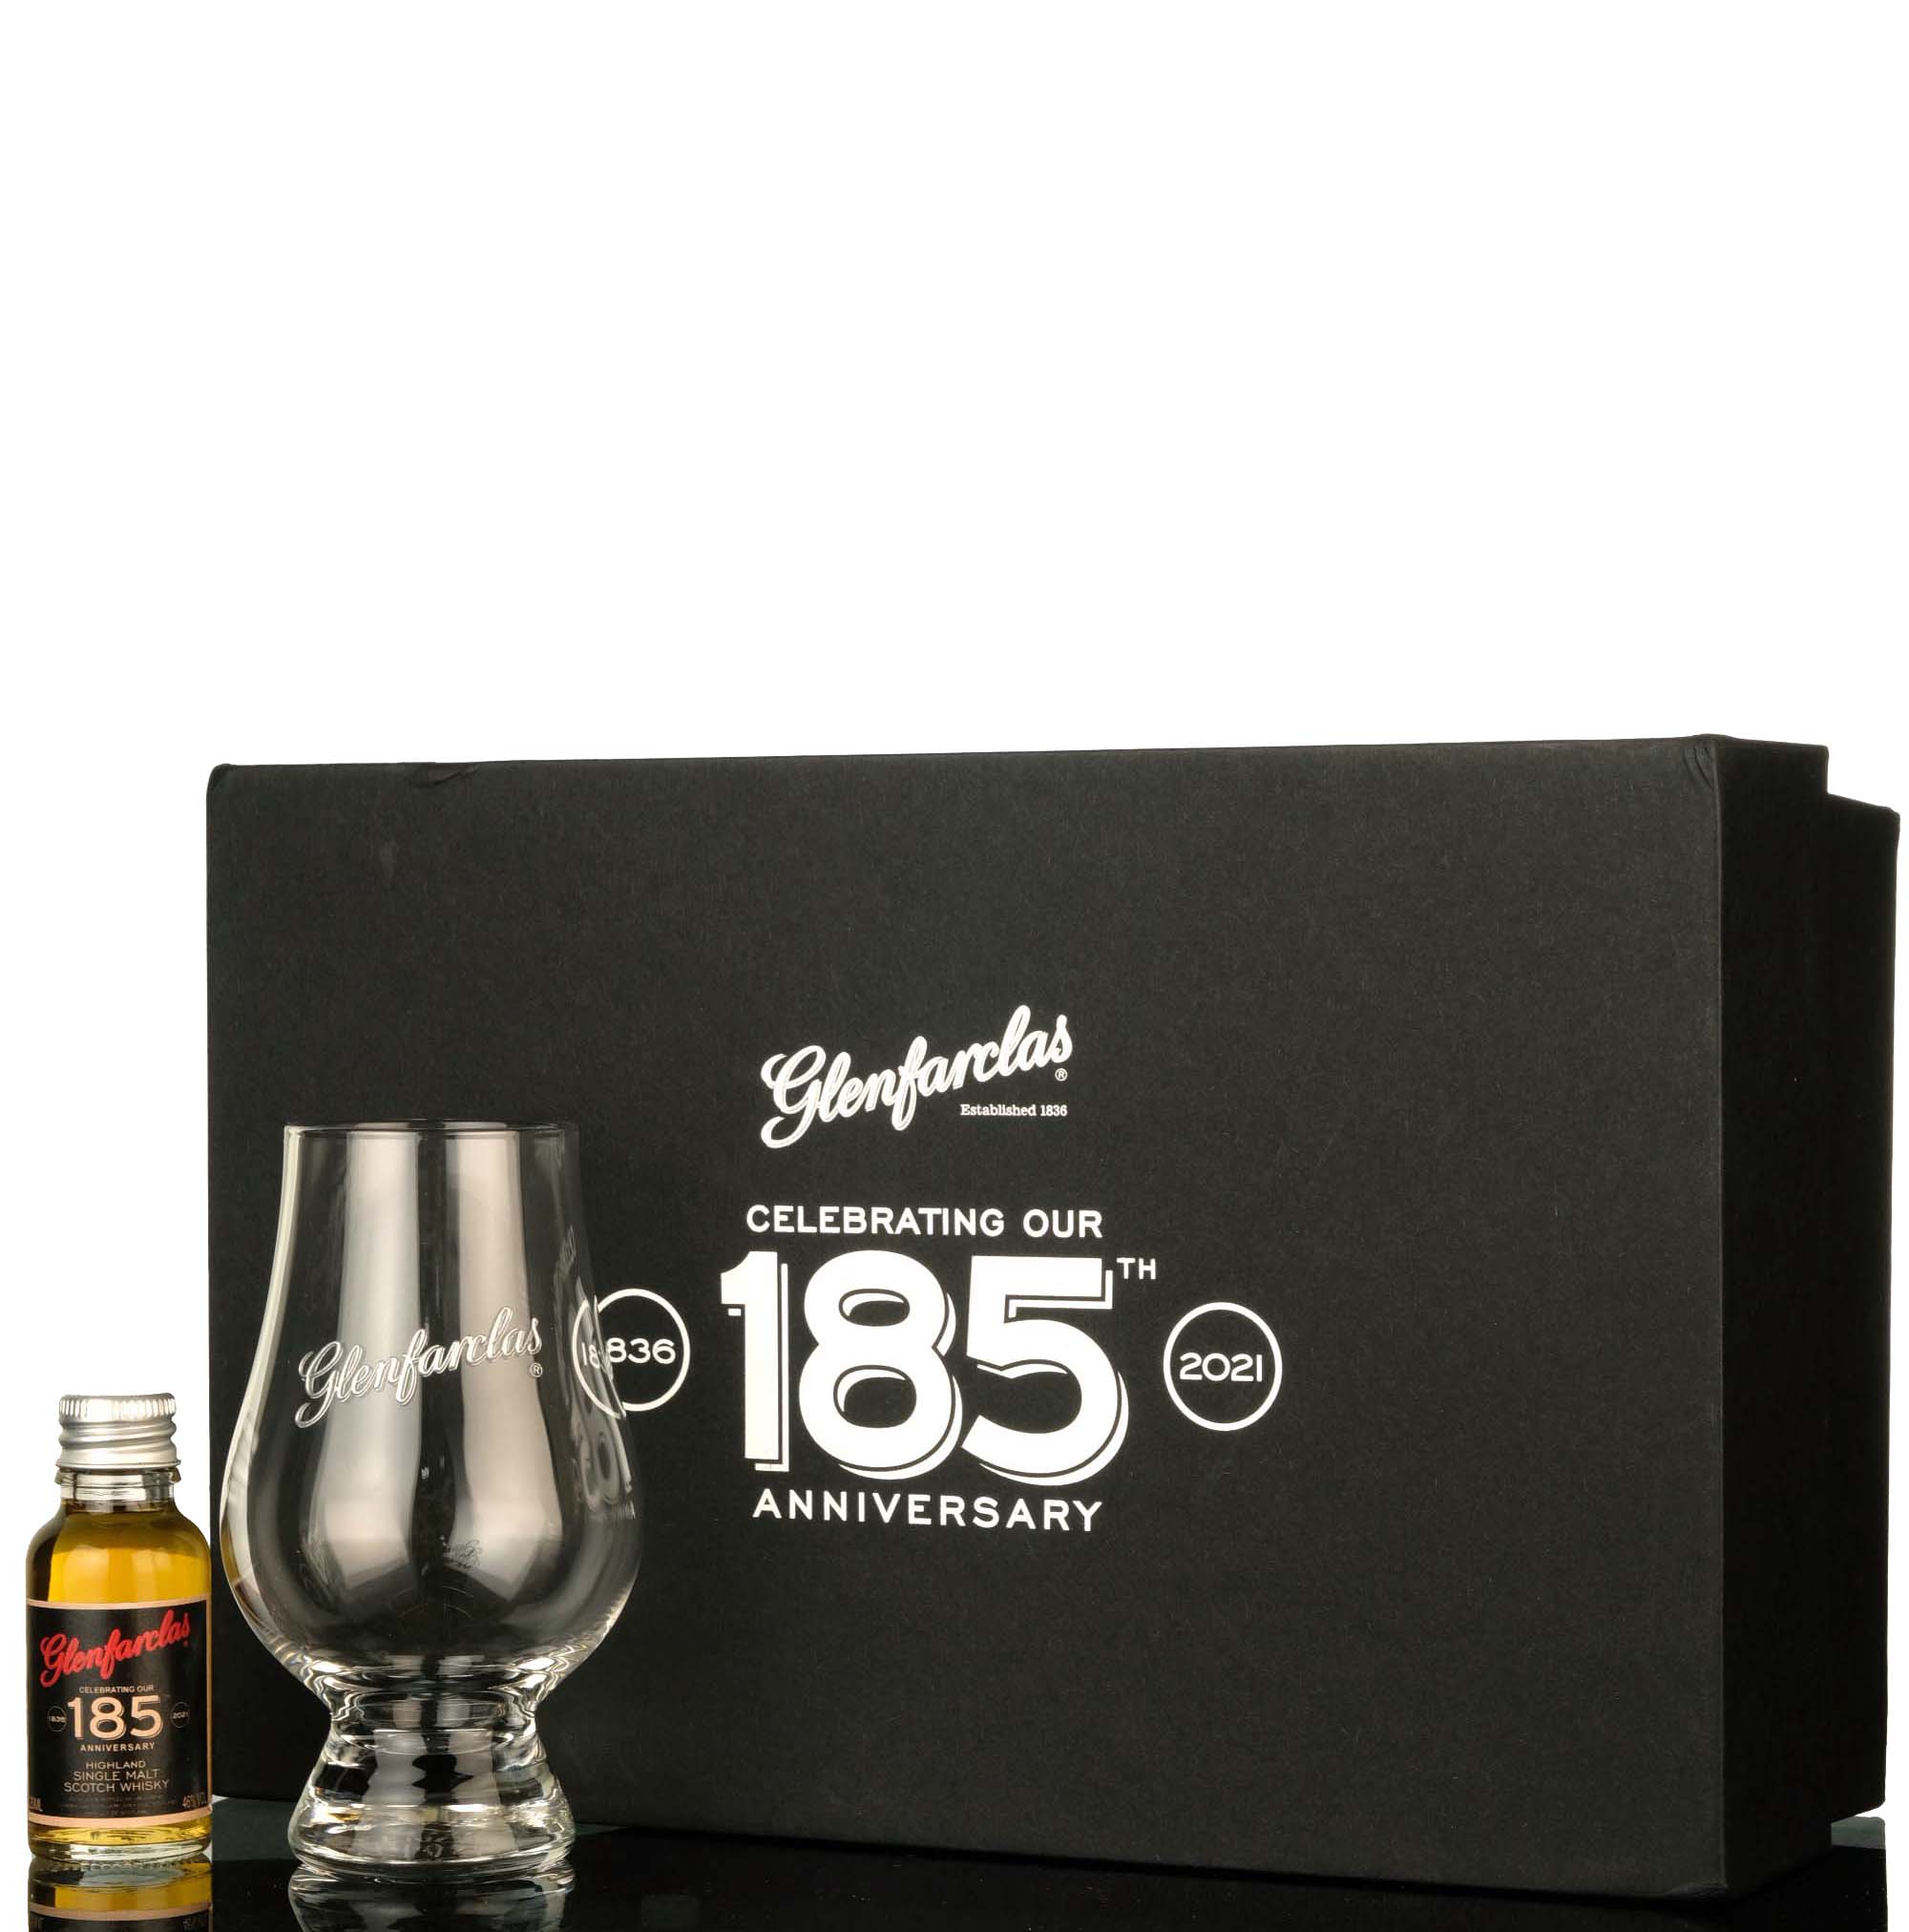 Glenfarclas Official Trade Pack - 185th Anniversary 1836-2021